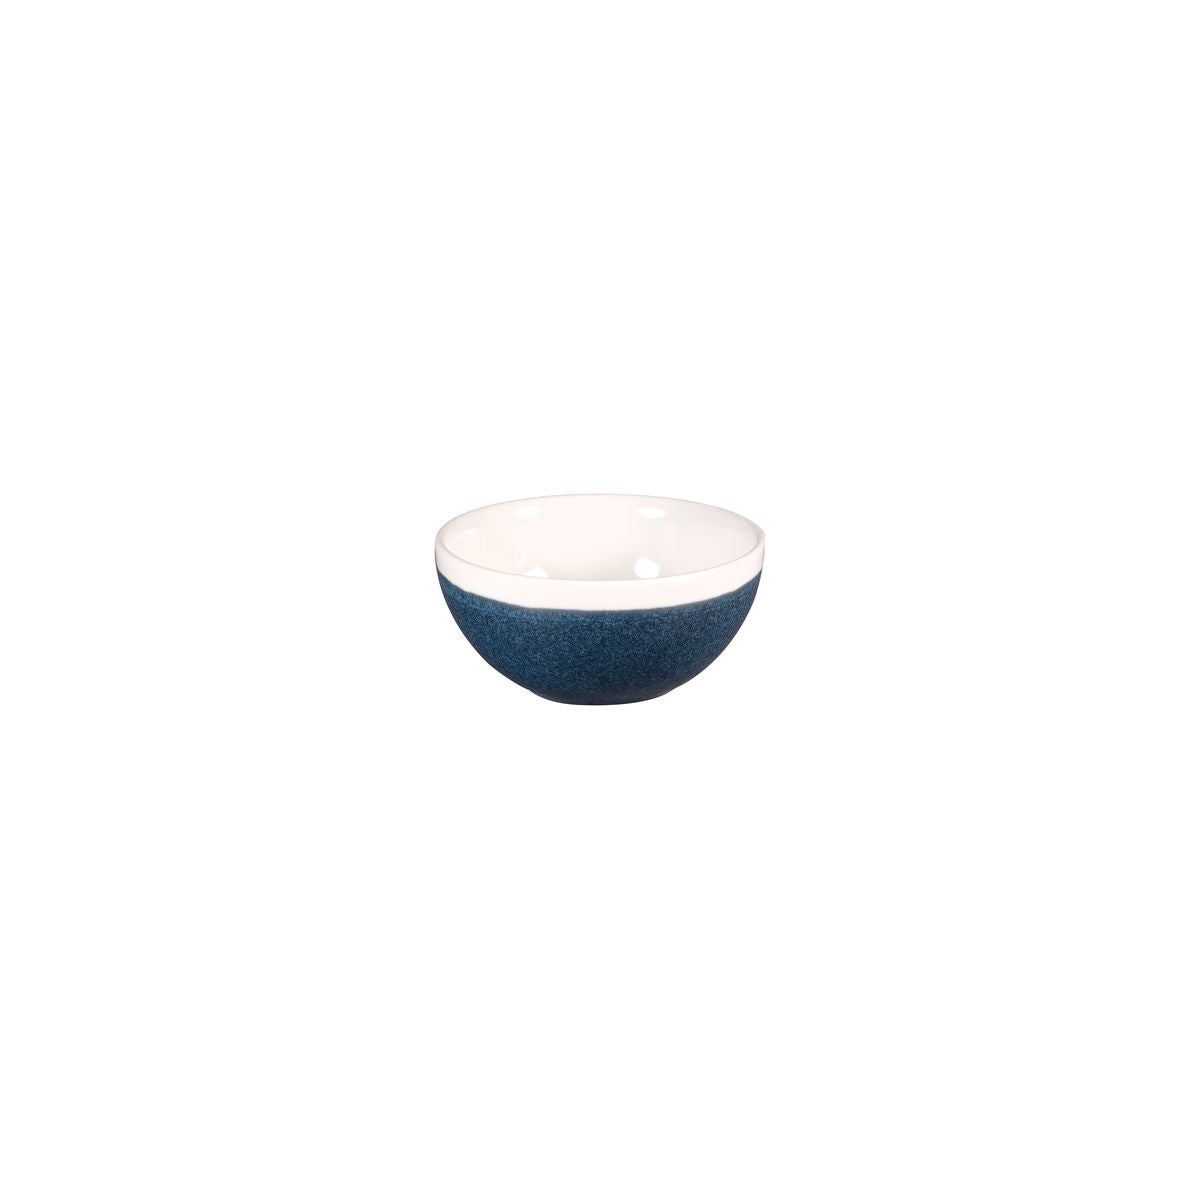 Round Bowl - 132mm, Monochrome Blue from Churchill. made out of Porcelain and sold in boxes of 12. Hospitality quality at wholesale price with The Flying Fork! 